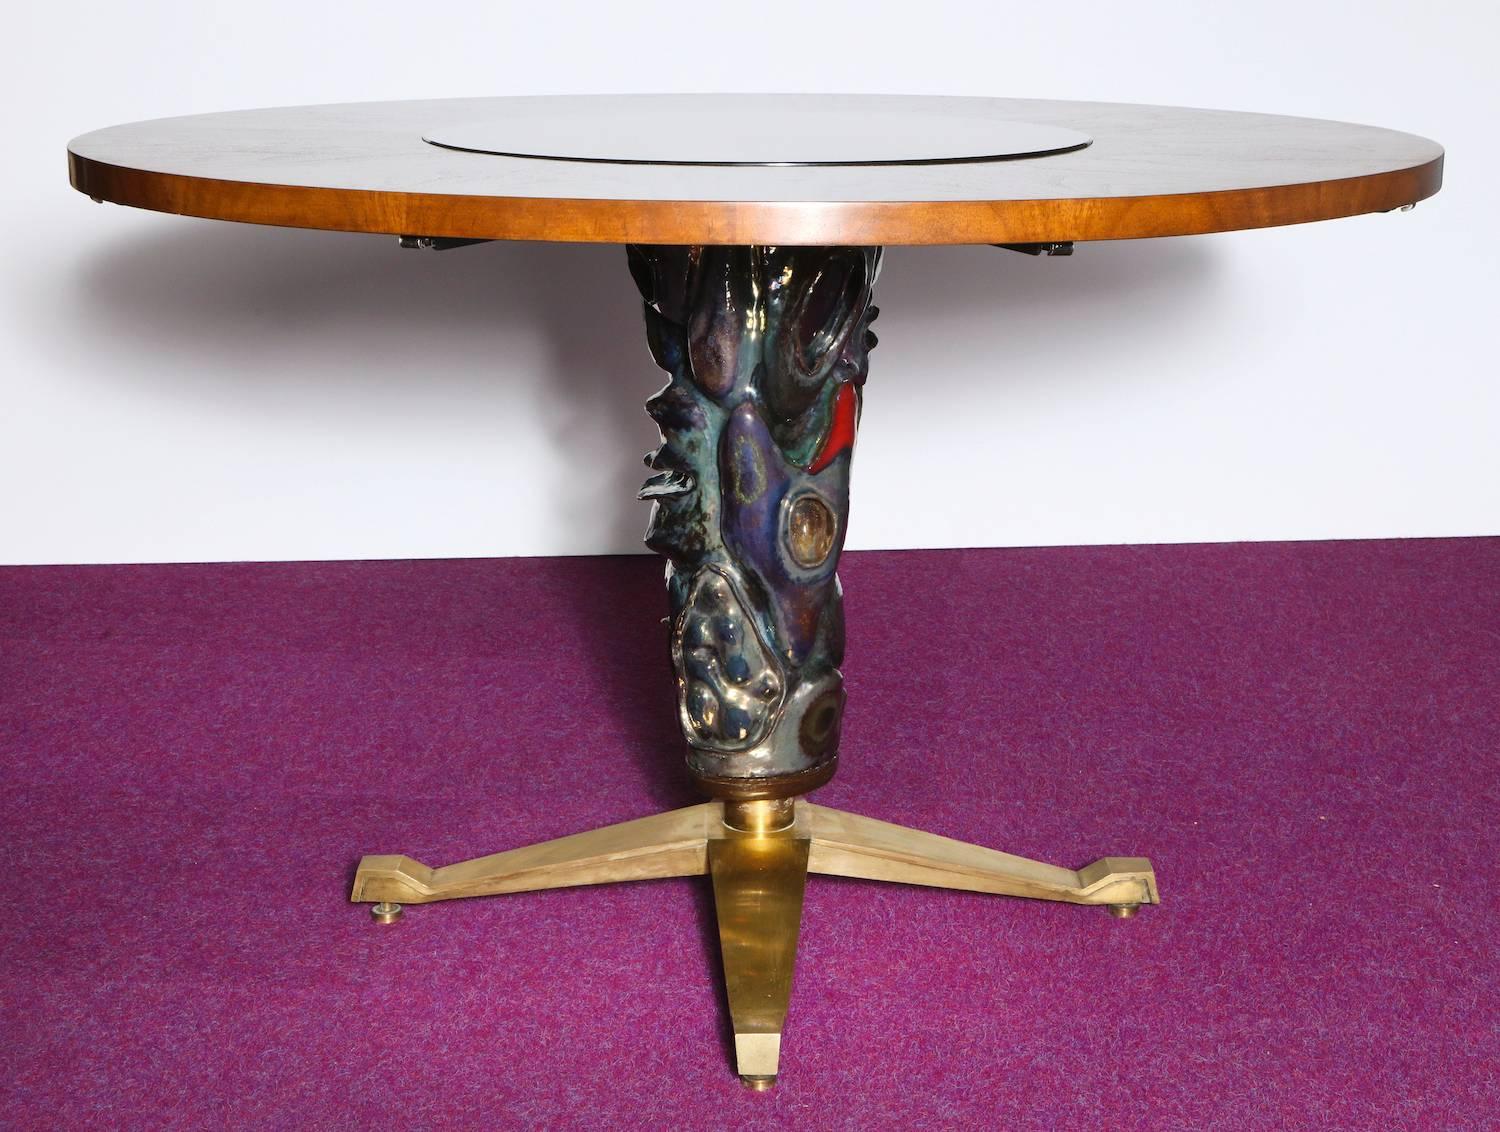 Circular center or dining table by Melchiorre Bega for Altamira. Rare and extraordinary table featuring a pedestal base with a large ceramic sculpture by Pietro Melandri and inset glass panel with reverse-gold-relief by Angelo Bragalini. Walnut top